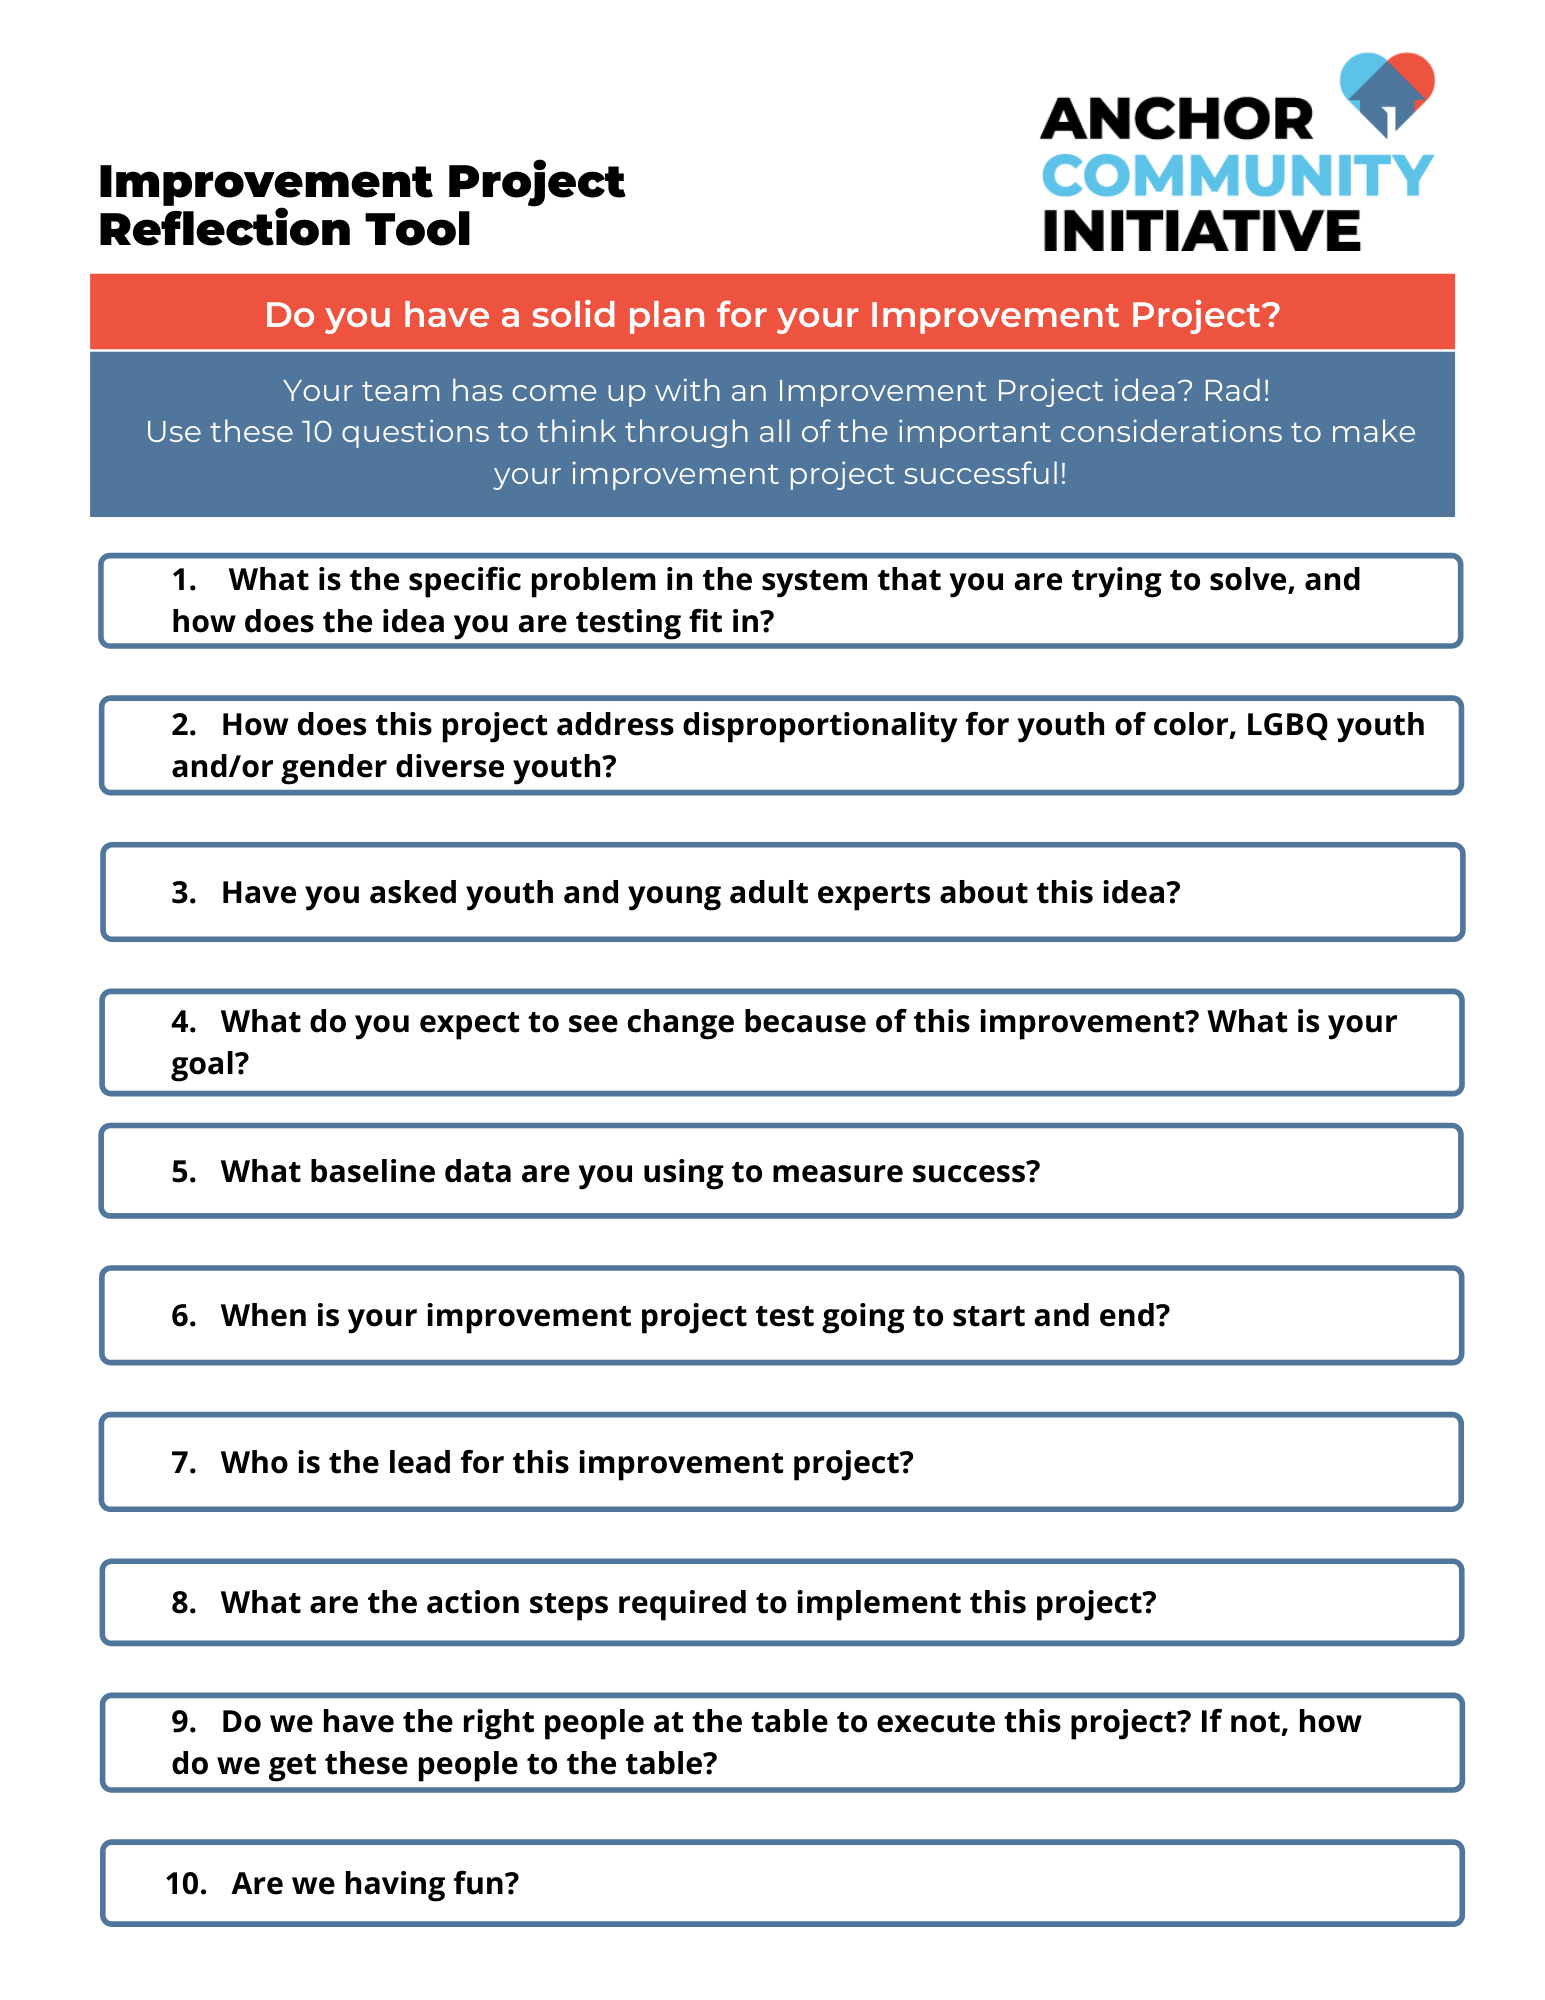 Improvement Project Reflection Tool.png